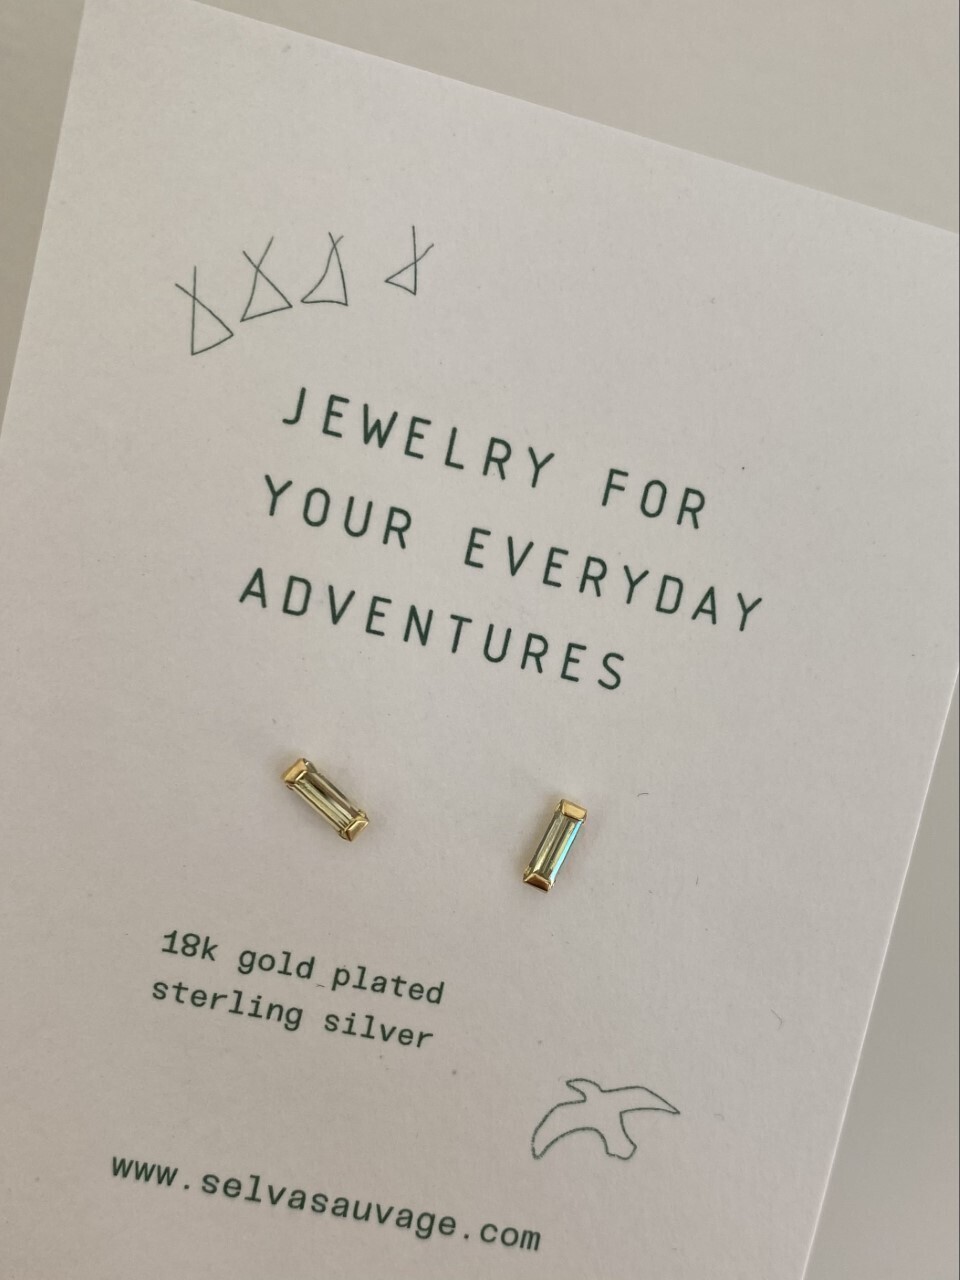 Selva Sauvage | Golden earstuds zircon olive green - 18k gold plated 925 sterling silver (a pair or a single)